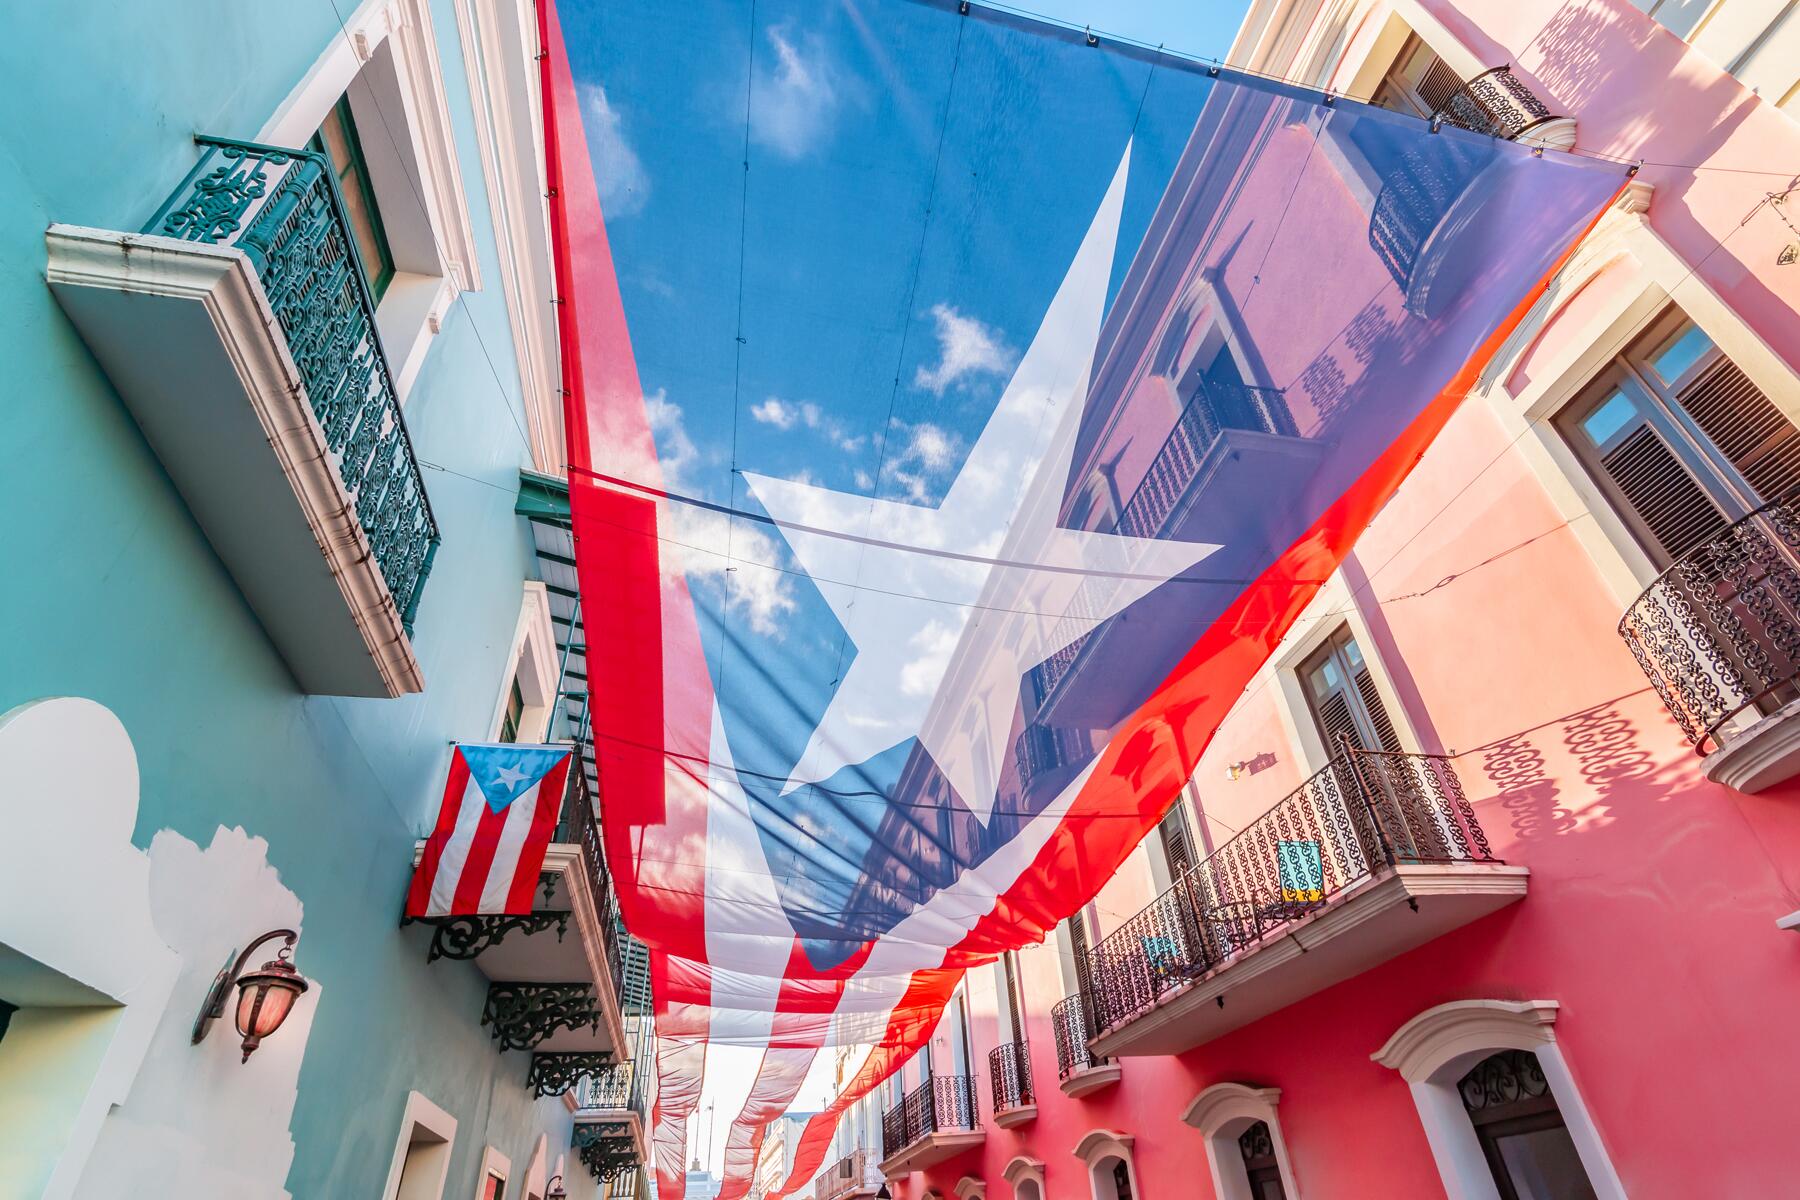 What You Need To Know About Traveling To Puerto Rico Right Now